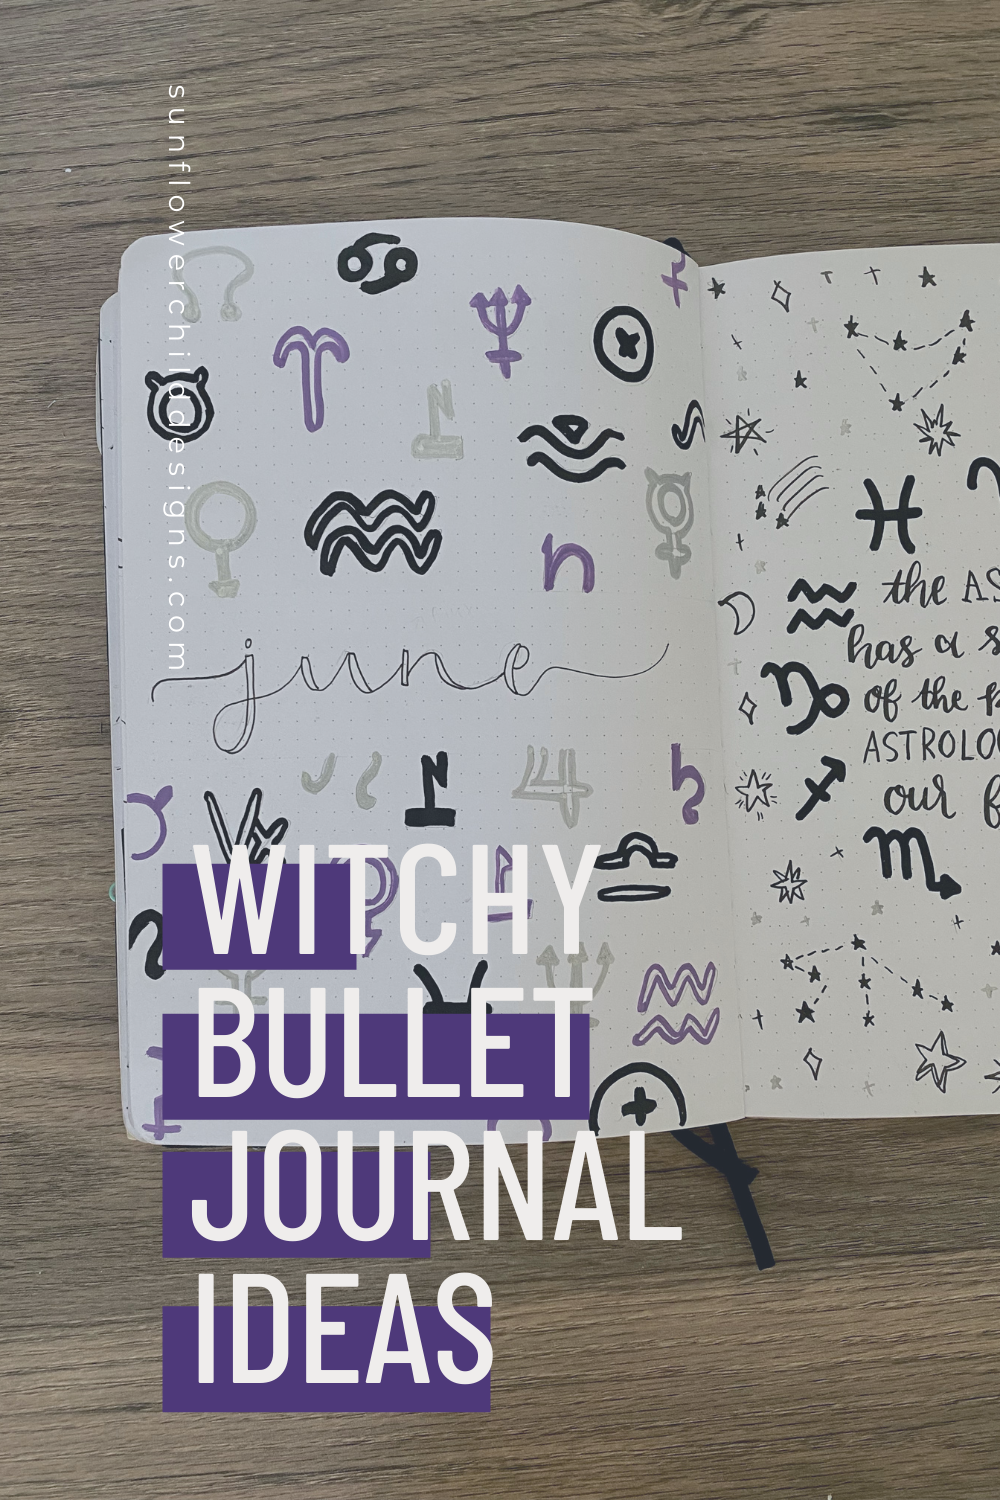 witchy-bullet-journal-ideas-june-bullet-journal-ideas 5.png